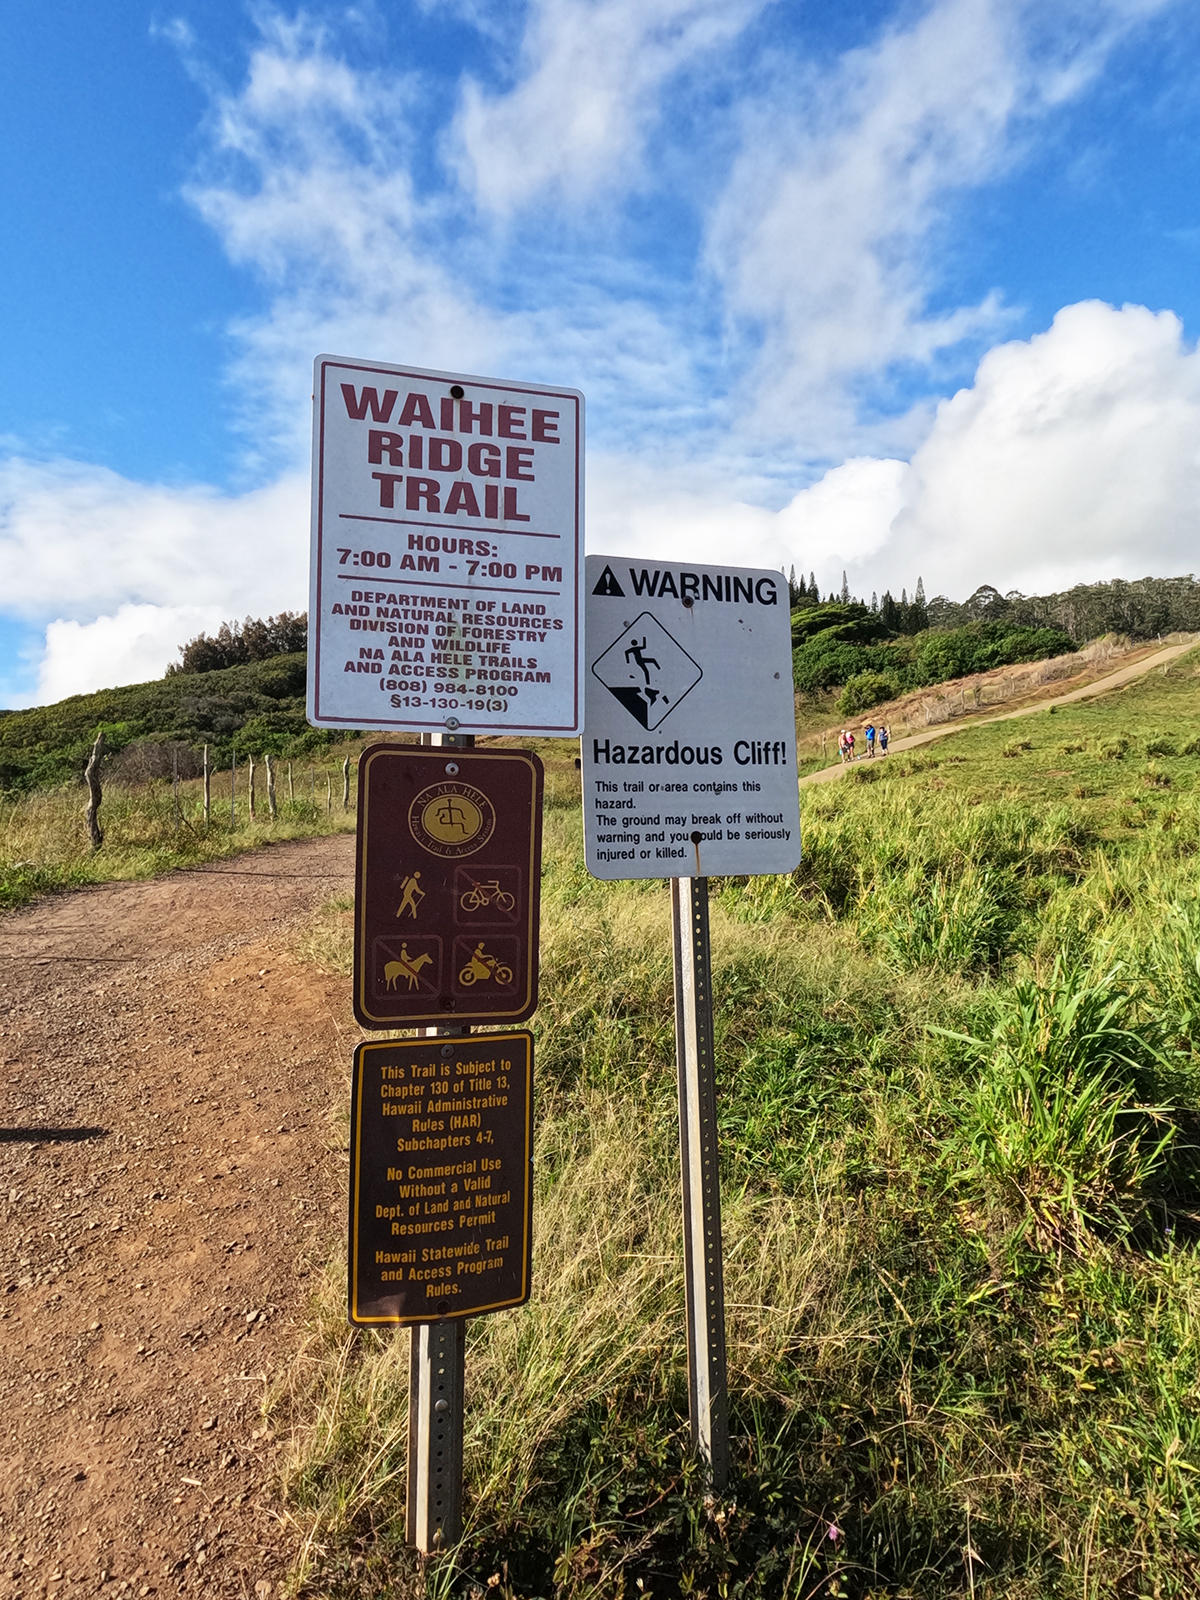 signs at waihee ridge trail with ours cliff warnings and trail details